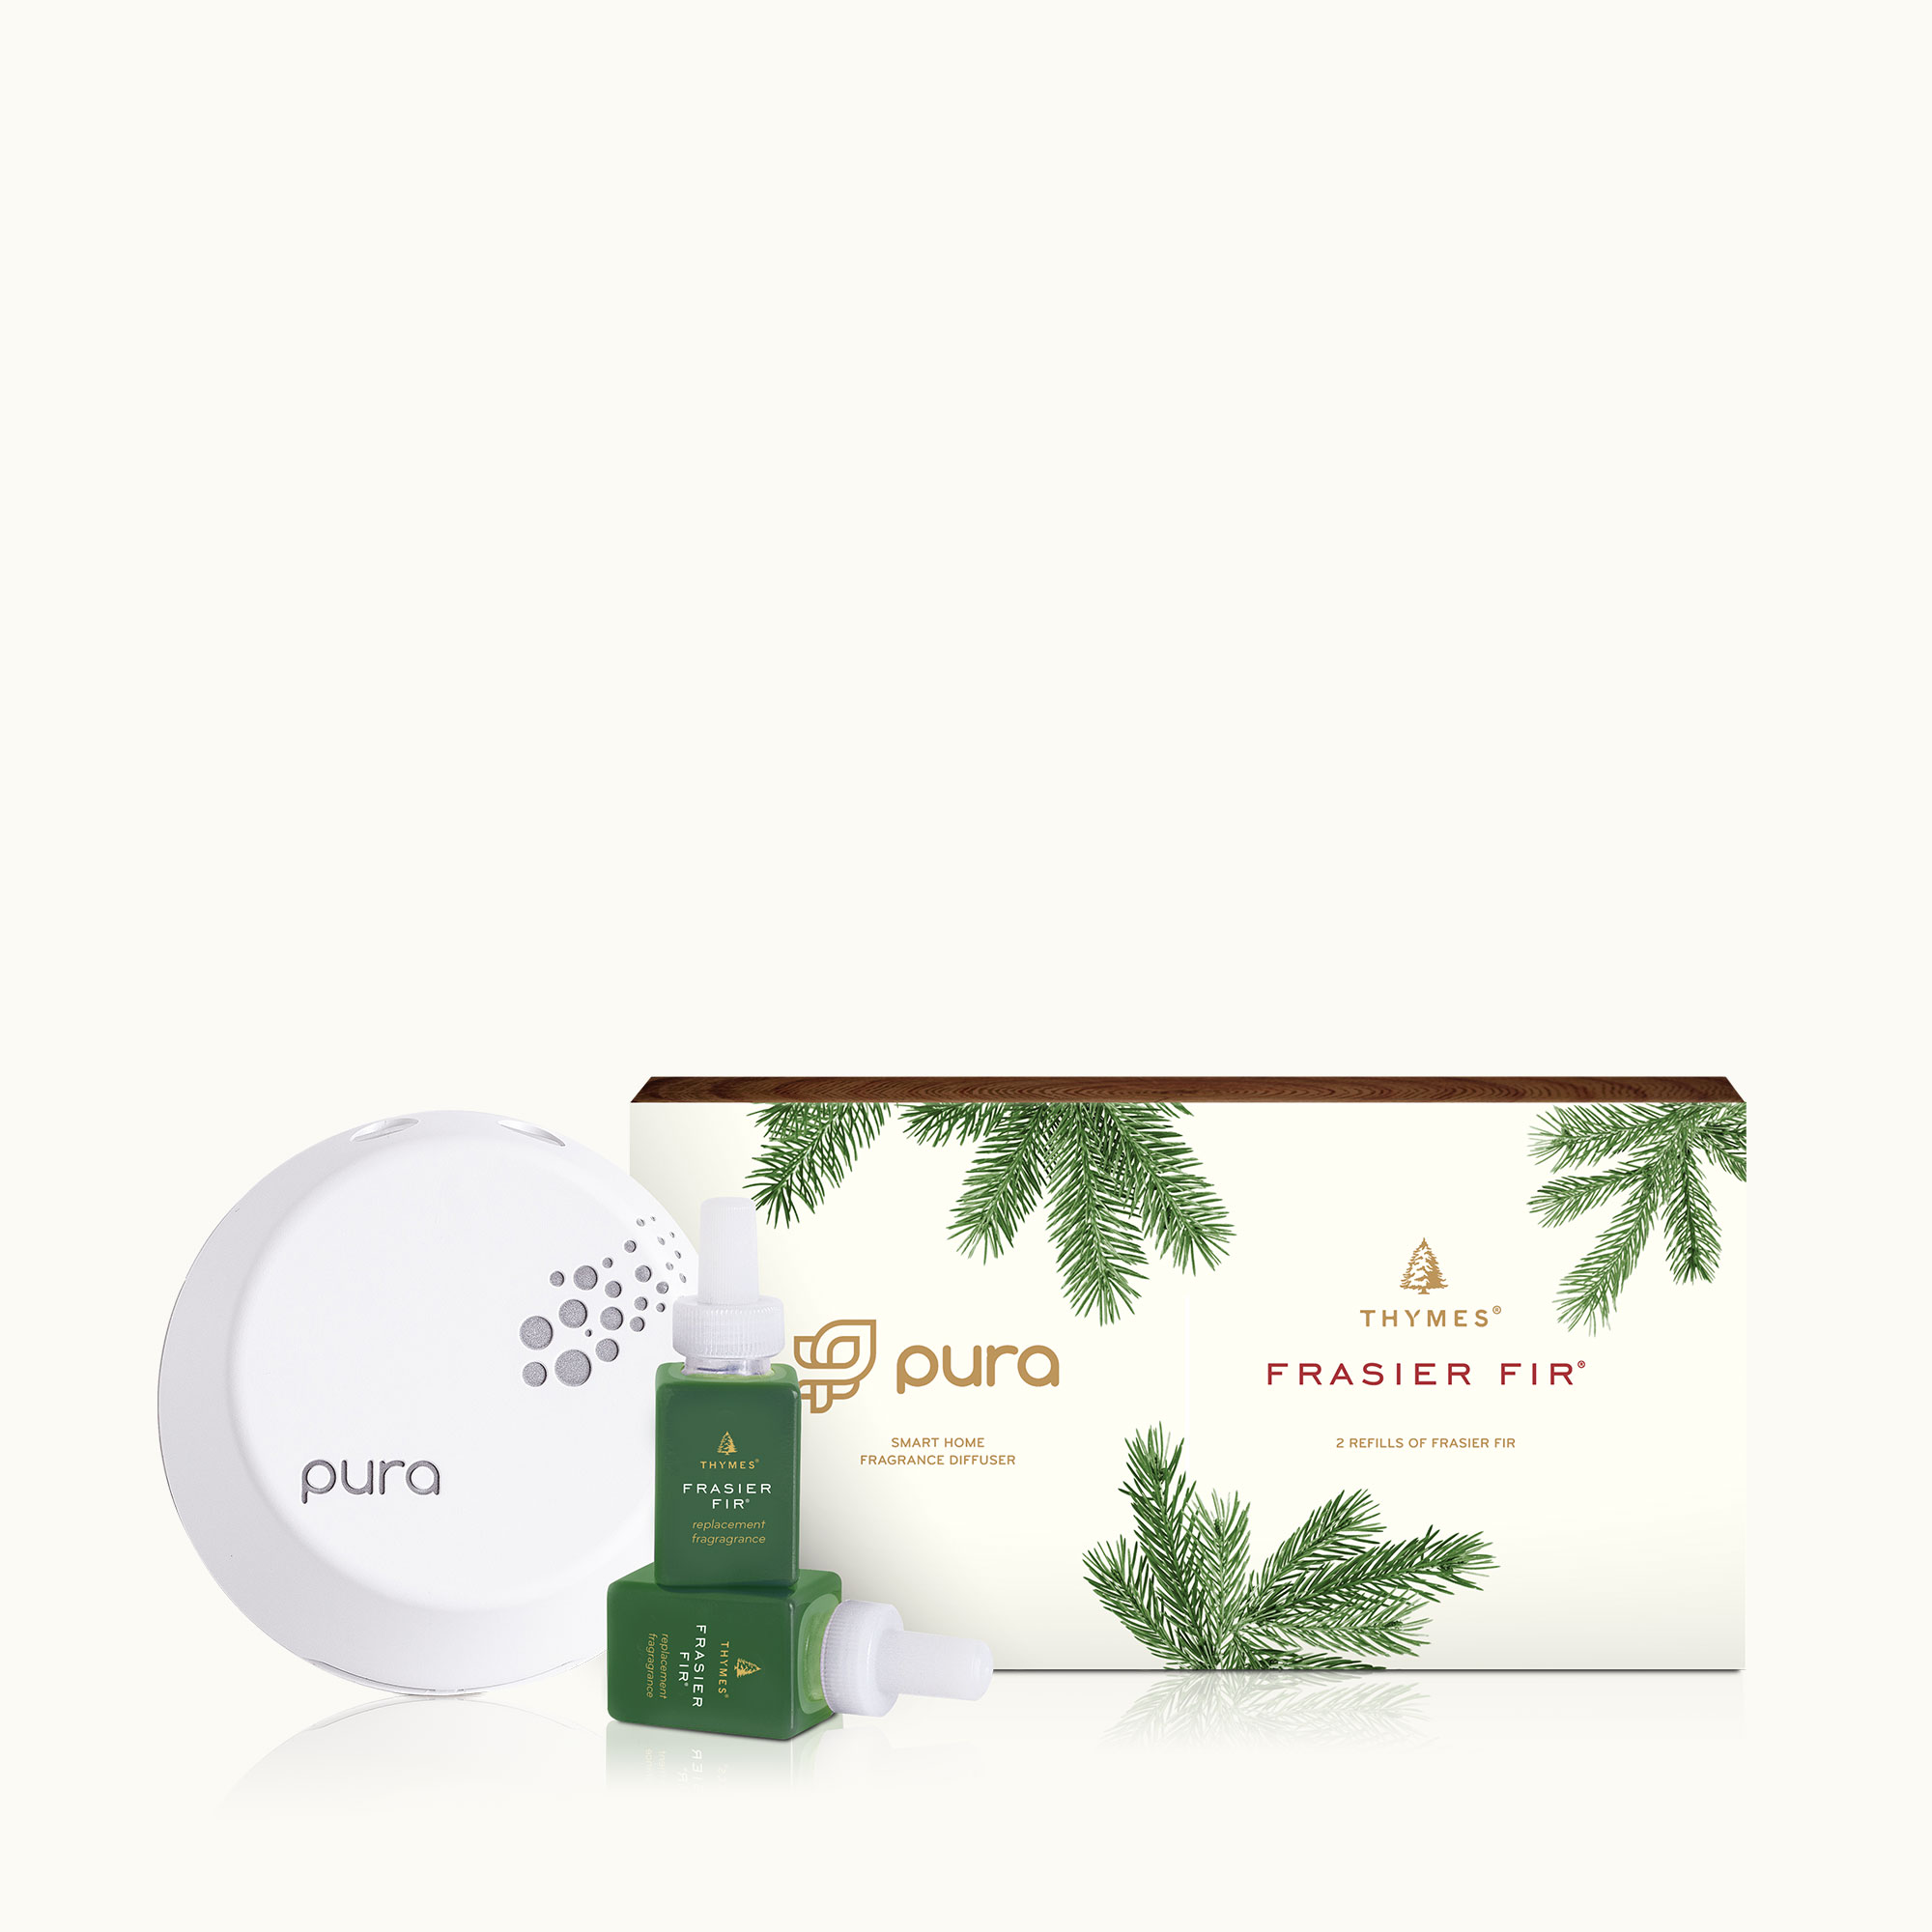 Washed Linen Pura Diffuser Refill|Thymes